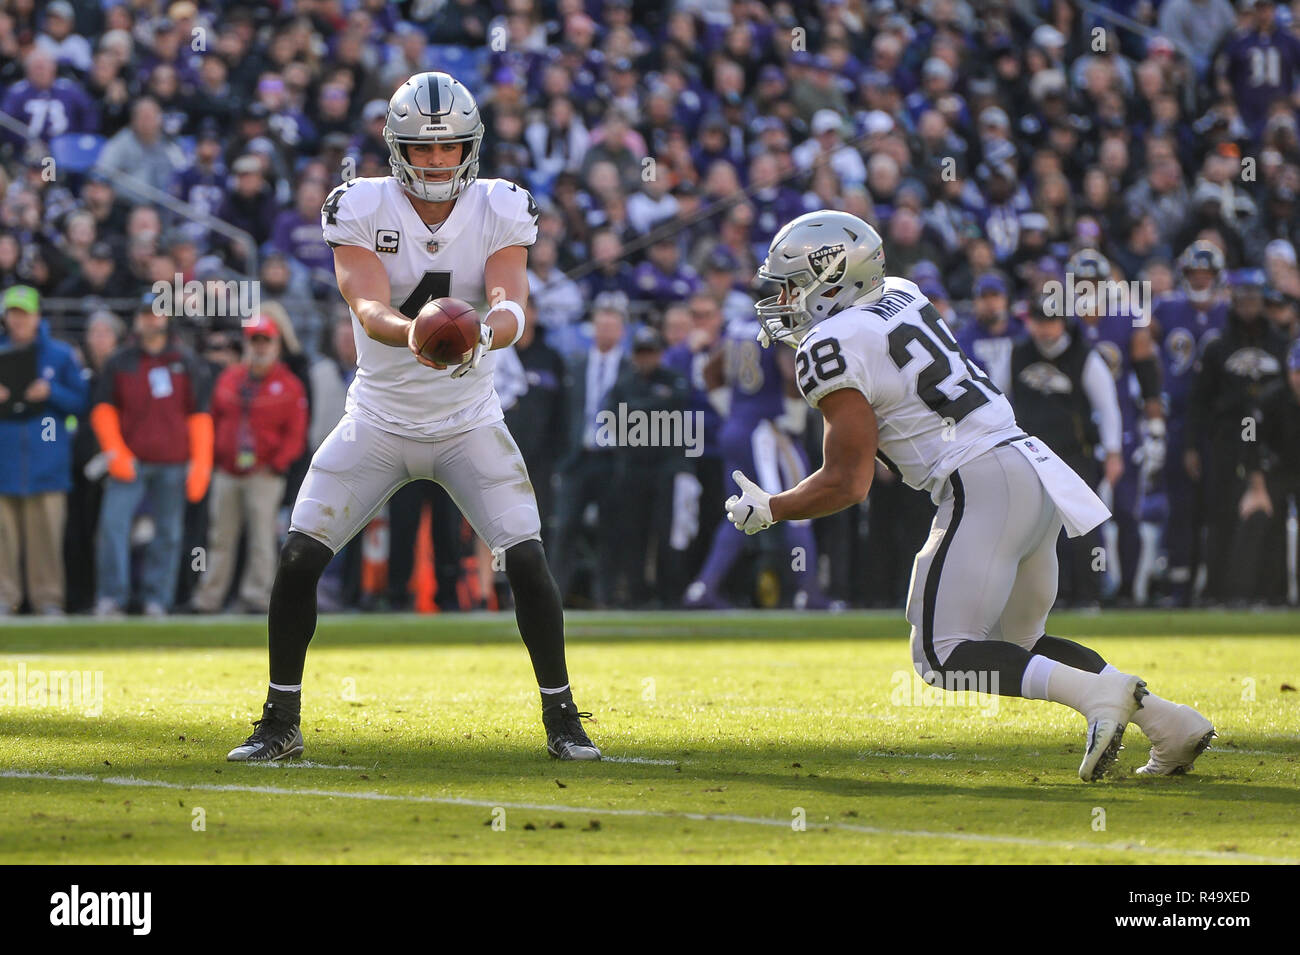 Baltimore, Maryland, USA. 25th Nov, 2018. Quarterback DEREK CARR (4) hands the football off to Running Back DOUG MARTIN during the game held at M & T Bank Stadium in Baltimore, Maryland. Credit: Amy Sanderson/ZUMA Wire/Alamy Live News Stock Photo